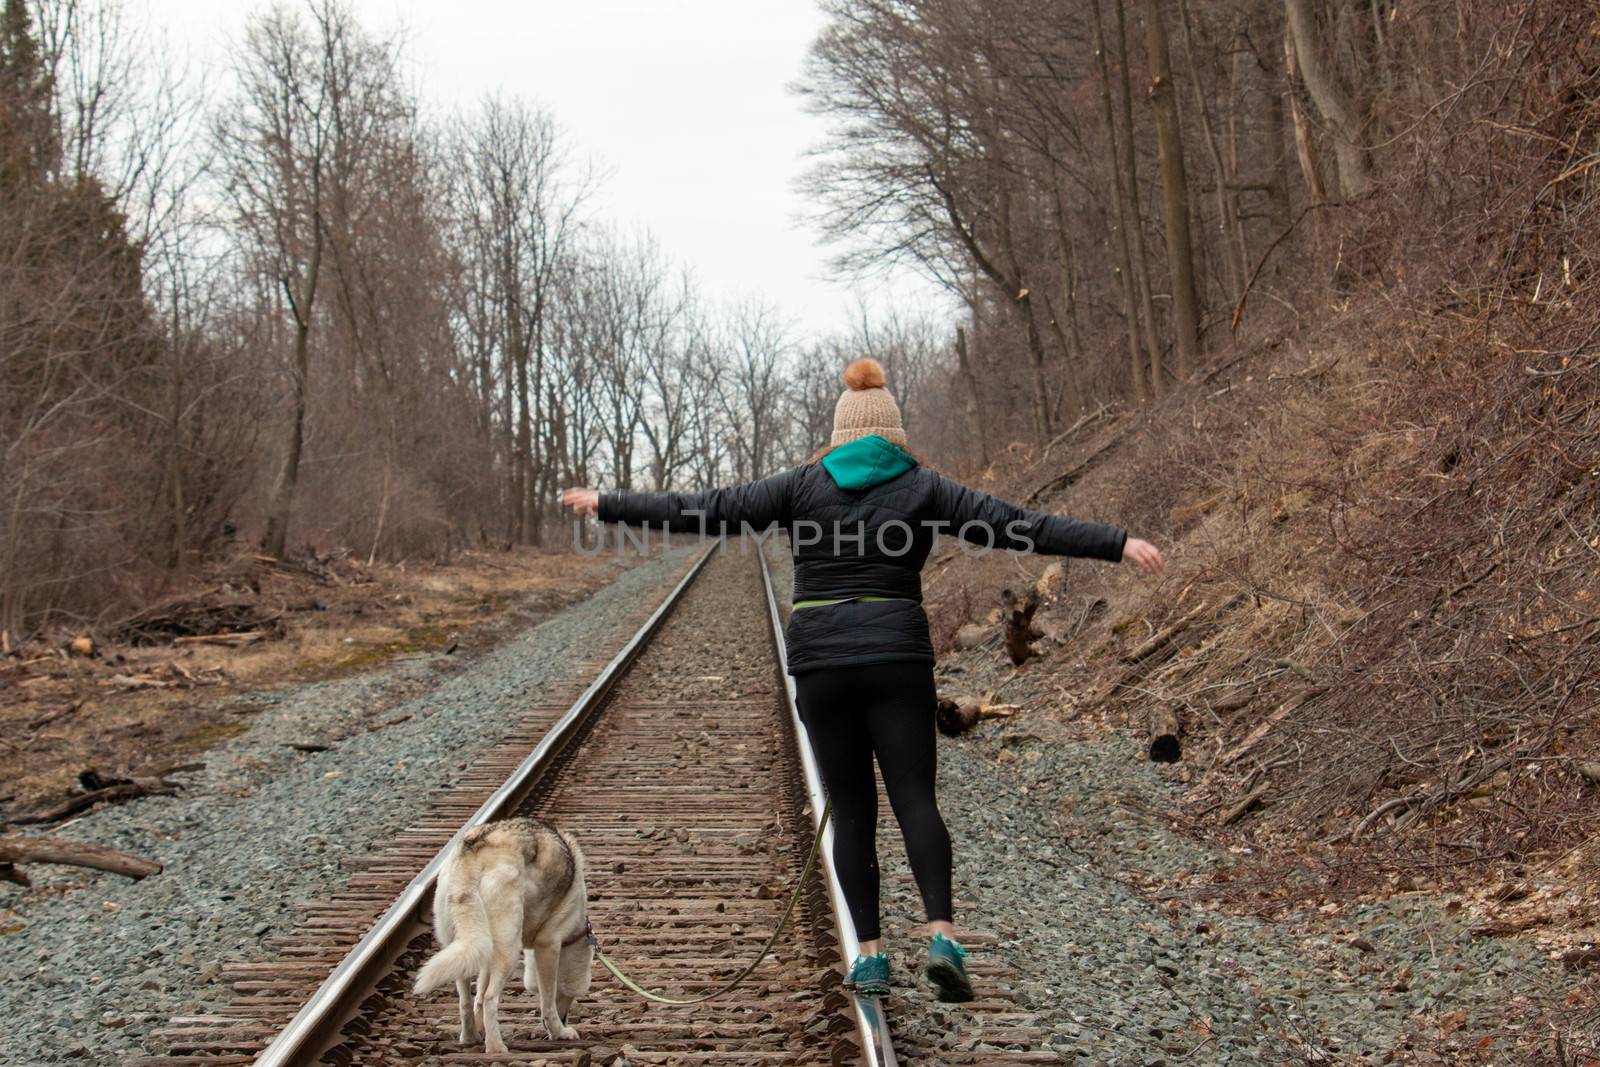 Hamilton Ontario, March 24 2020: Editorial photo of a women walking on train tracks with her dog. Editorial theme of loneliness . High quality photo